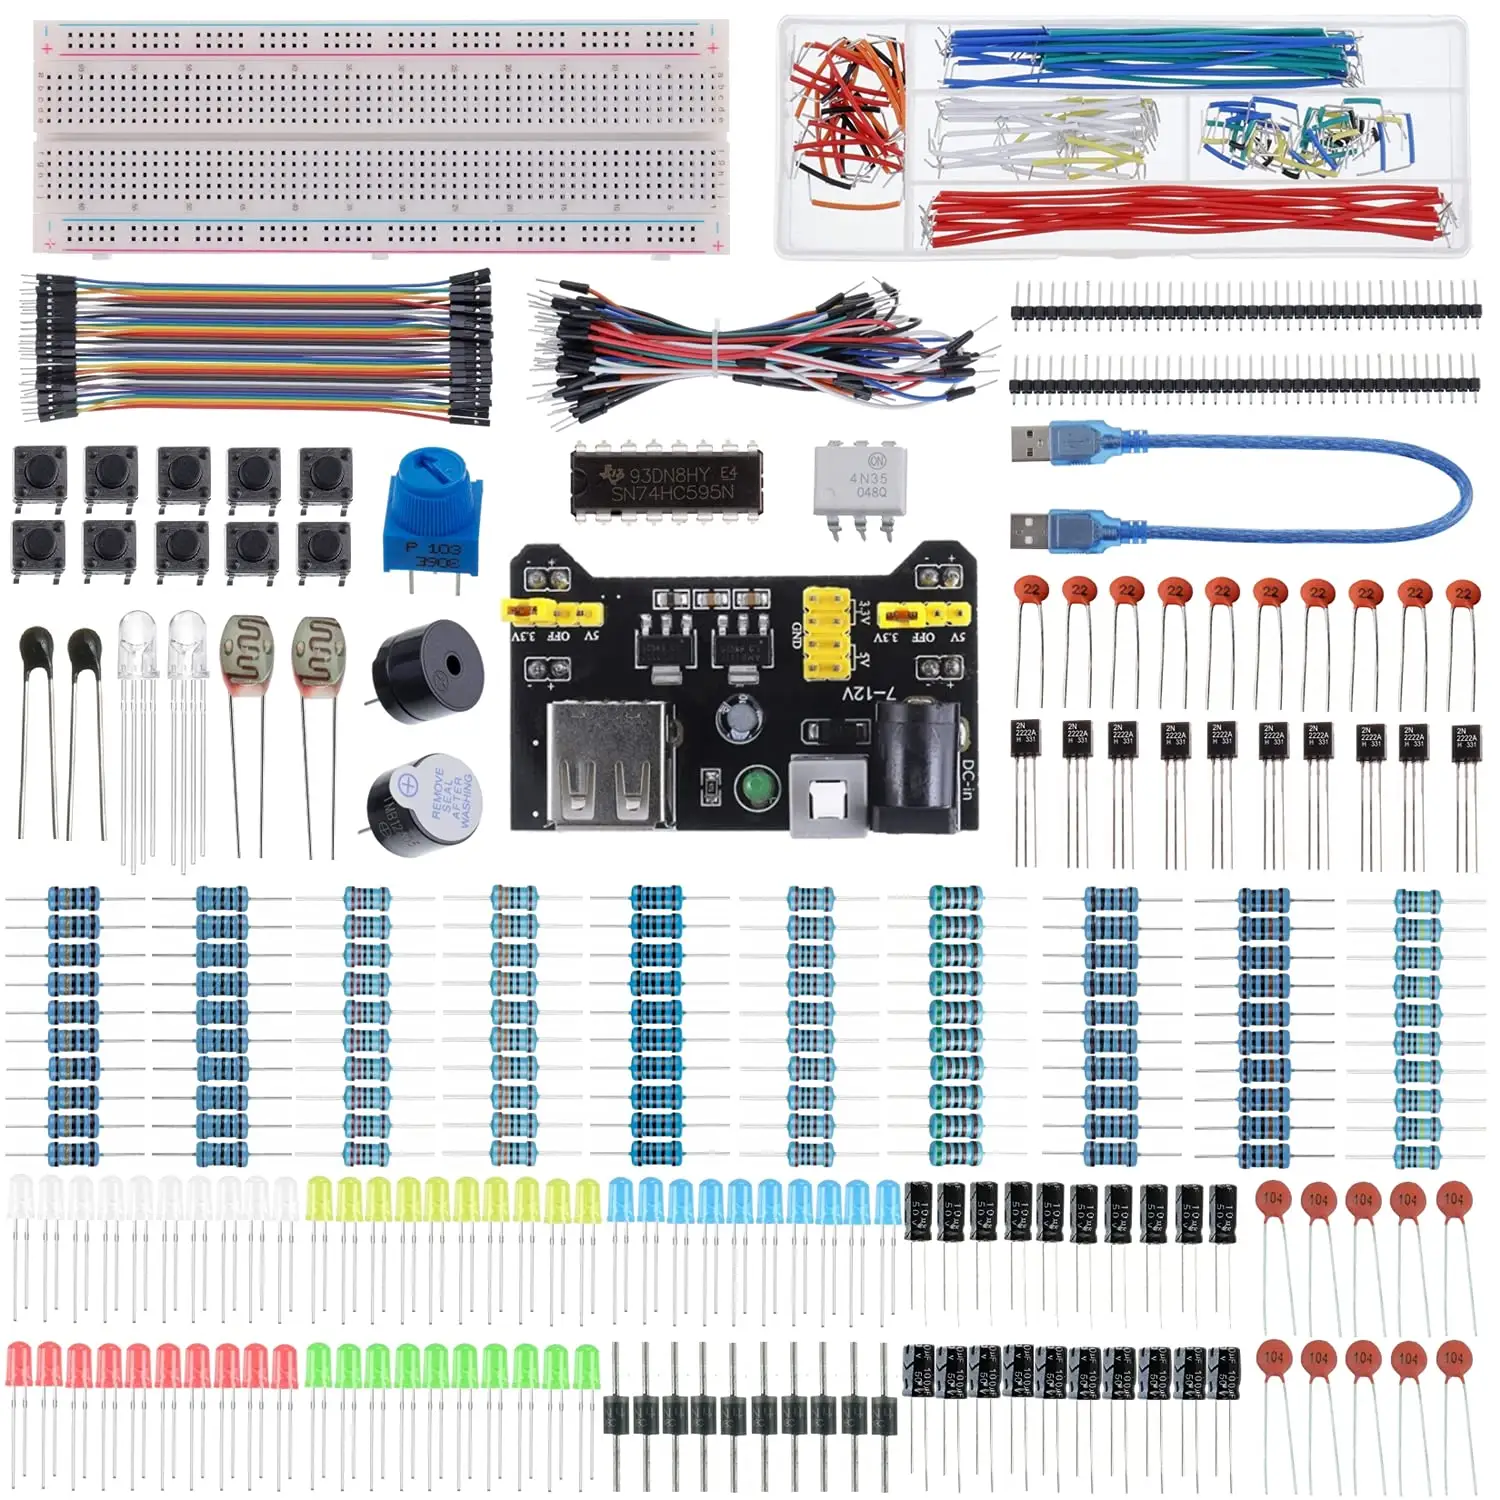 DIY Project Starter Electronic Kit with 830 Tie-points Breadboard Jumper Wire for Arduino R3 Electronic Components Set